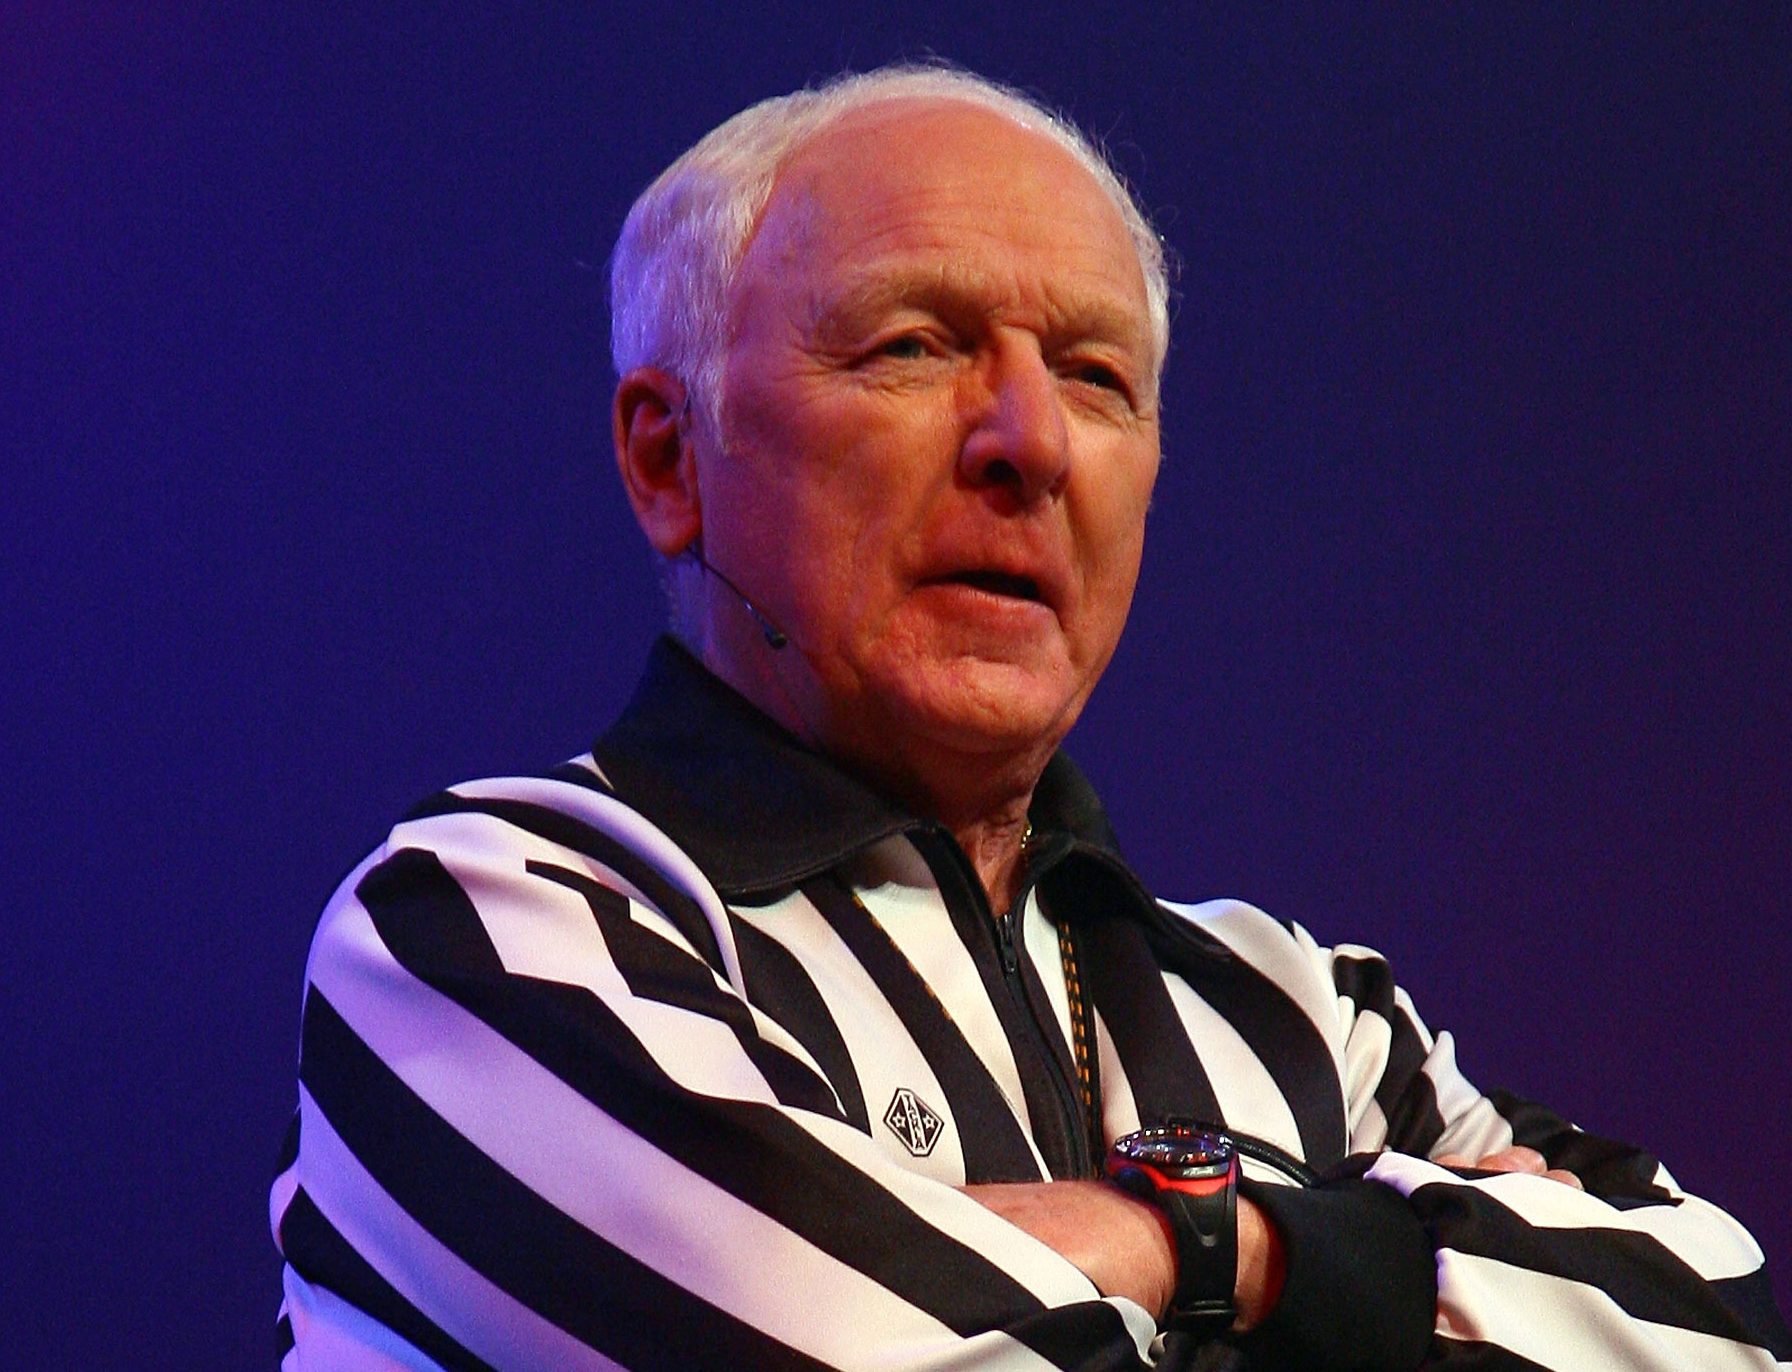  John was iconic as the game's referee